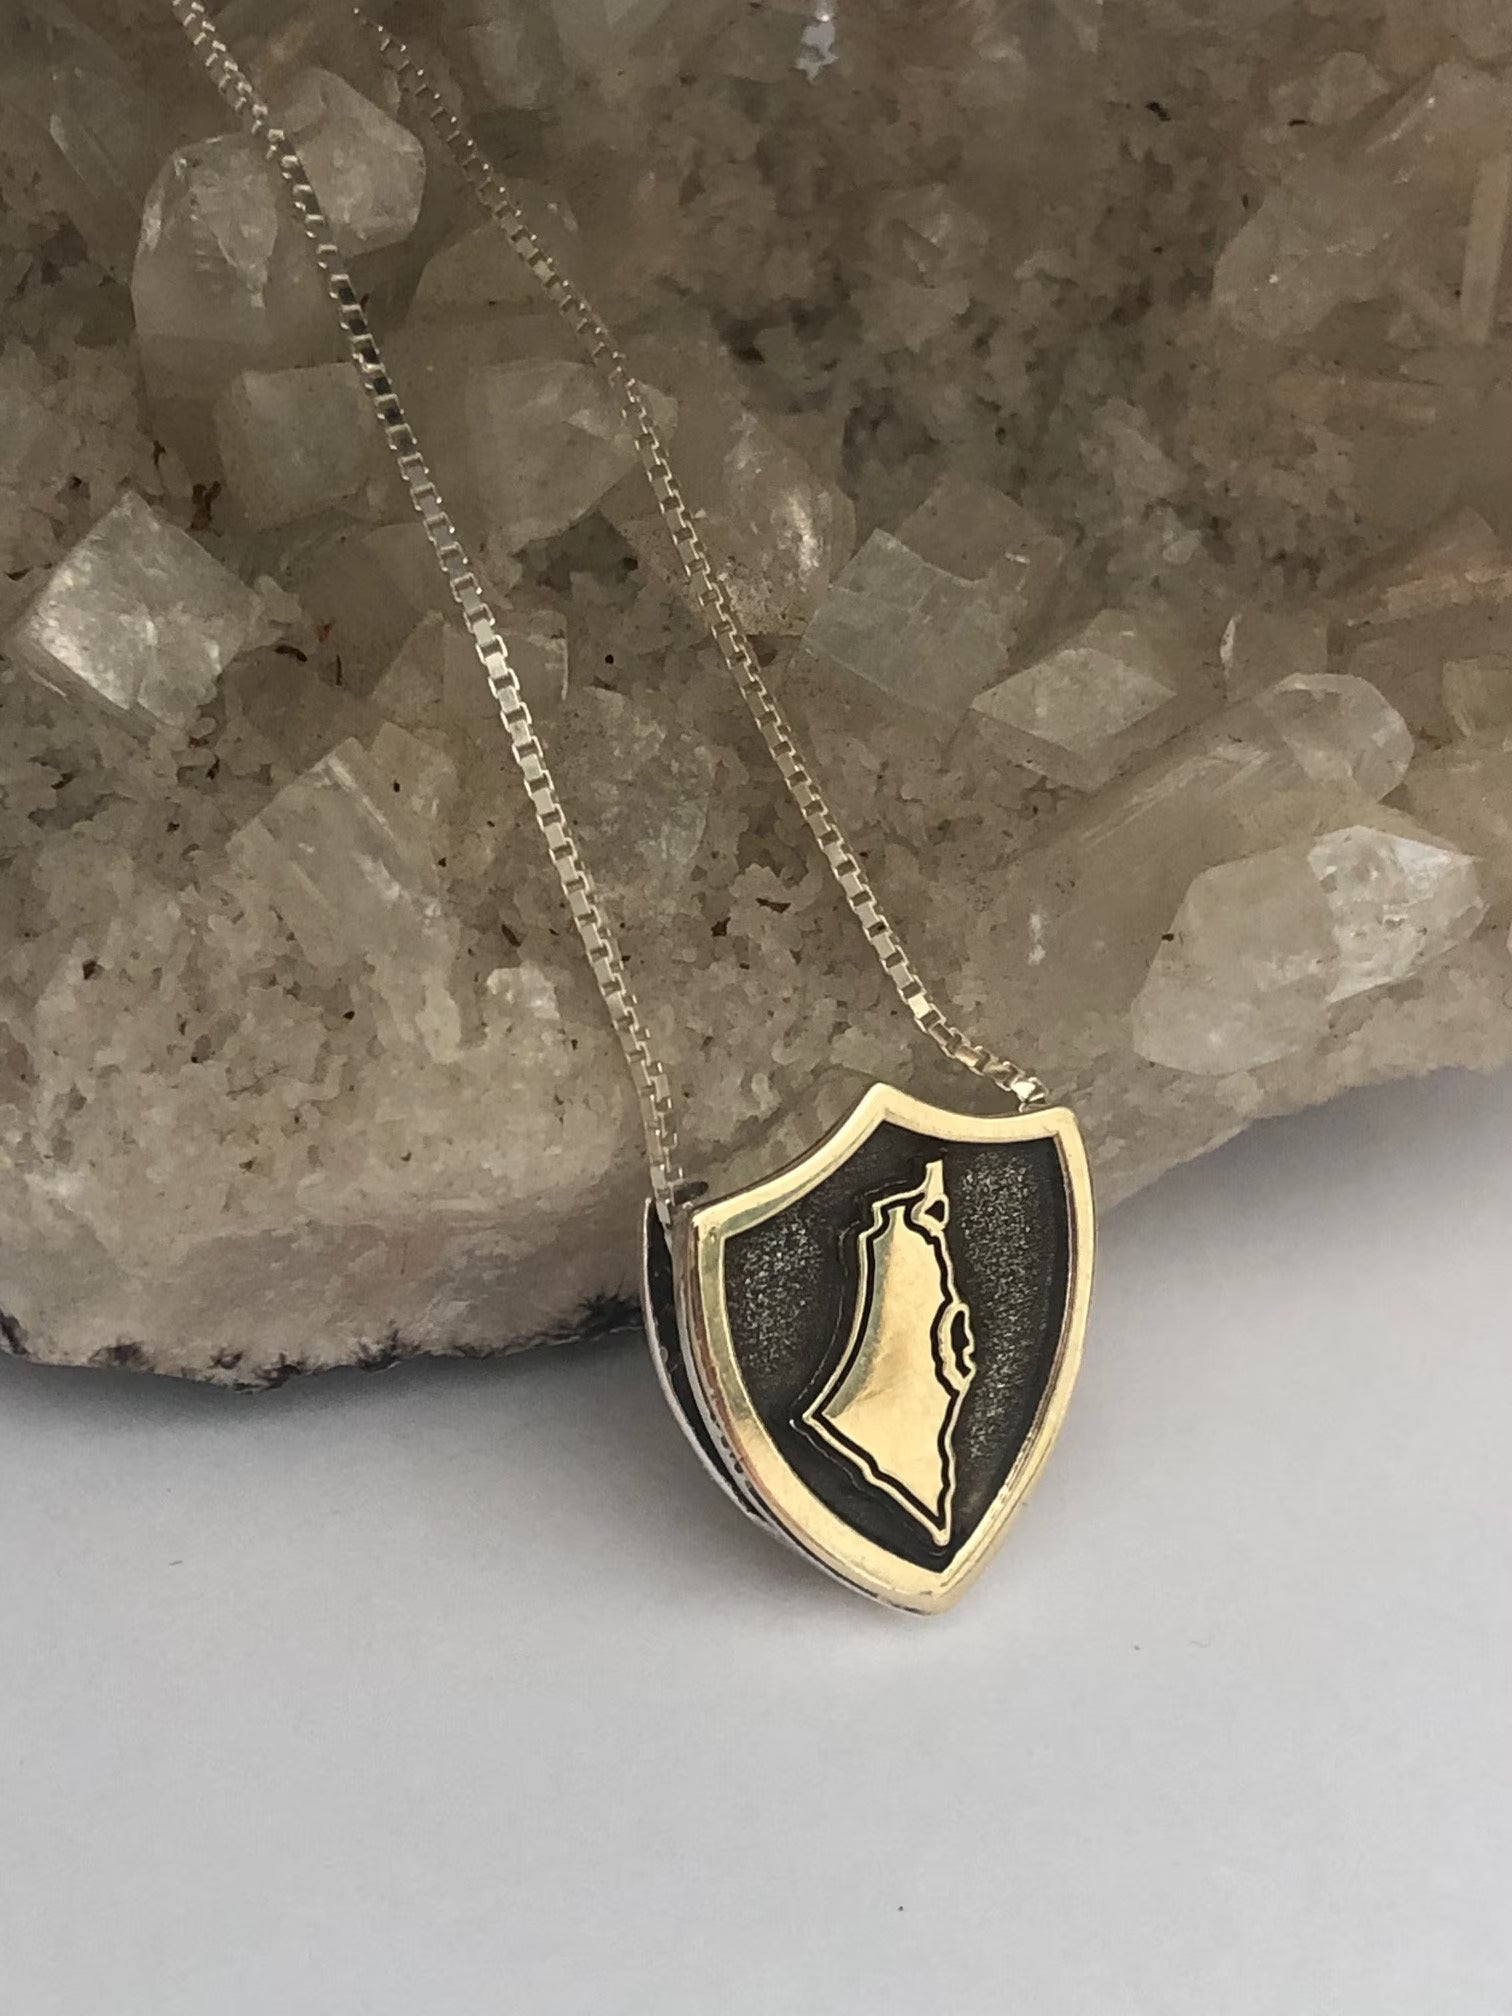 Gold and Silver Steel Shield Pendant | Map of Israel with Shema Israel | Holy Land Israel Necklace | Spiritual Jewelry | New Year Gift